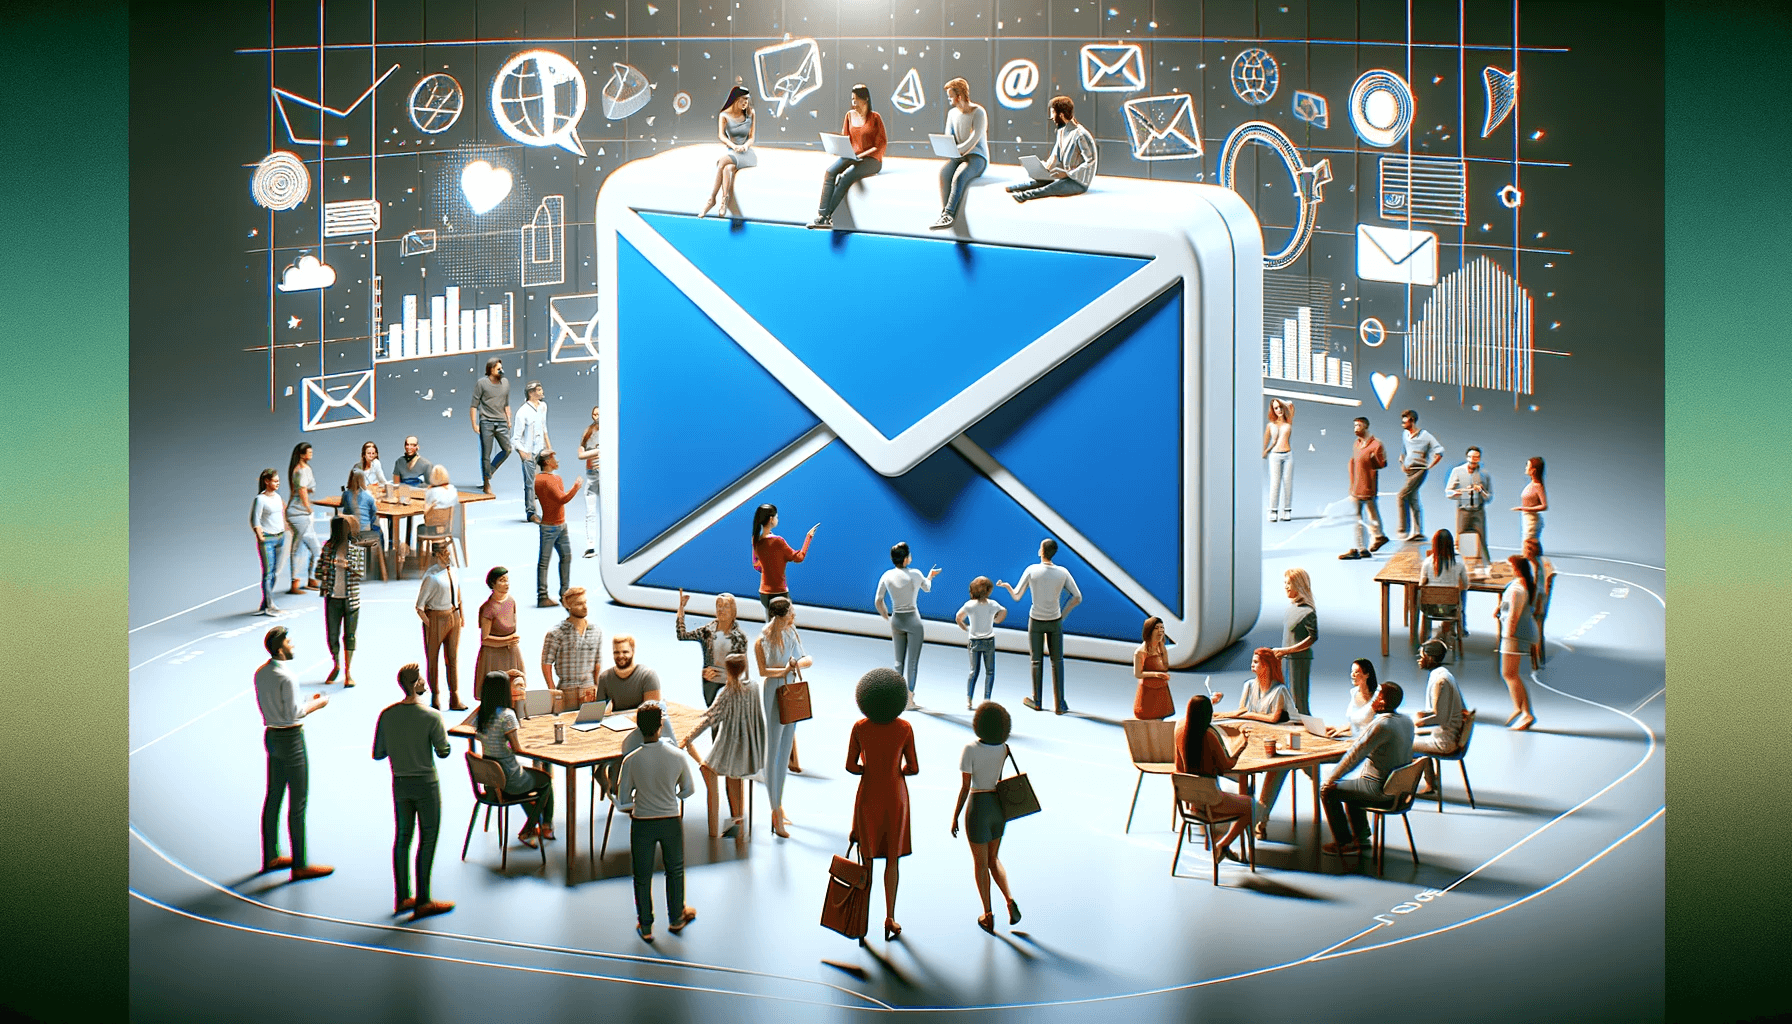 A lively scene of influencers and marketers gathered around a giant email envelope, symbolizing the importance of email outreach in influencer marketing.